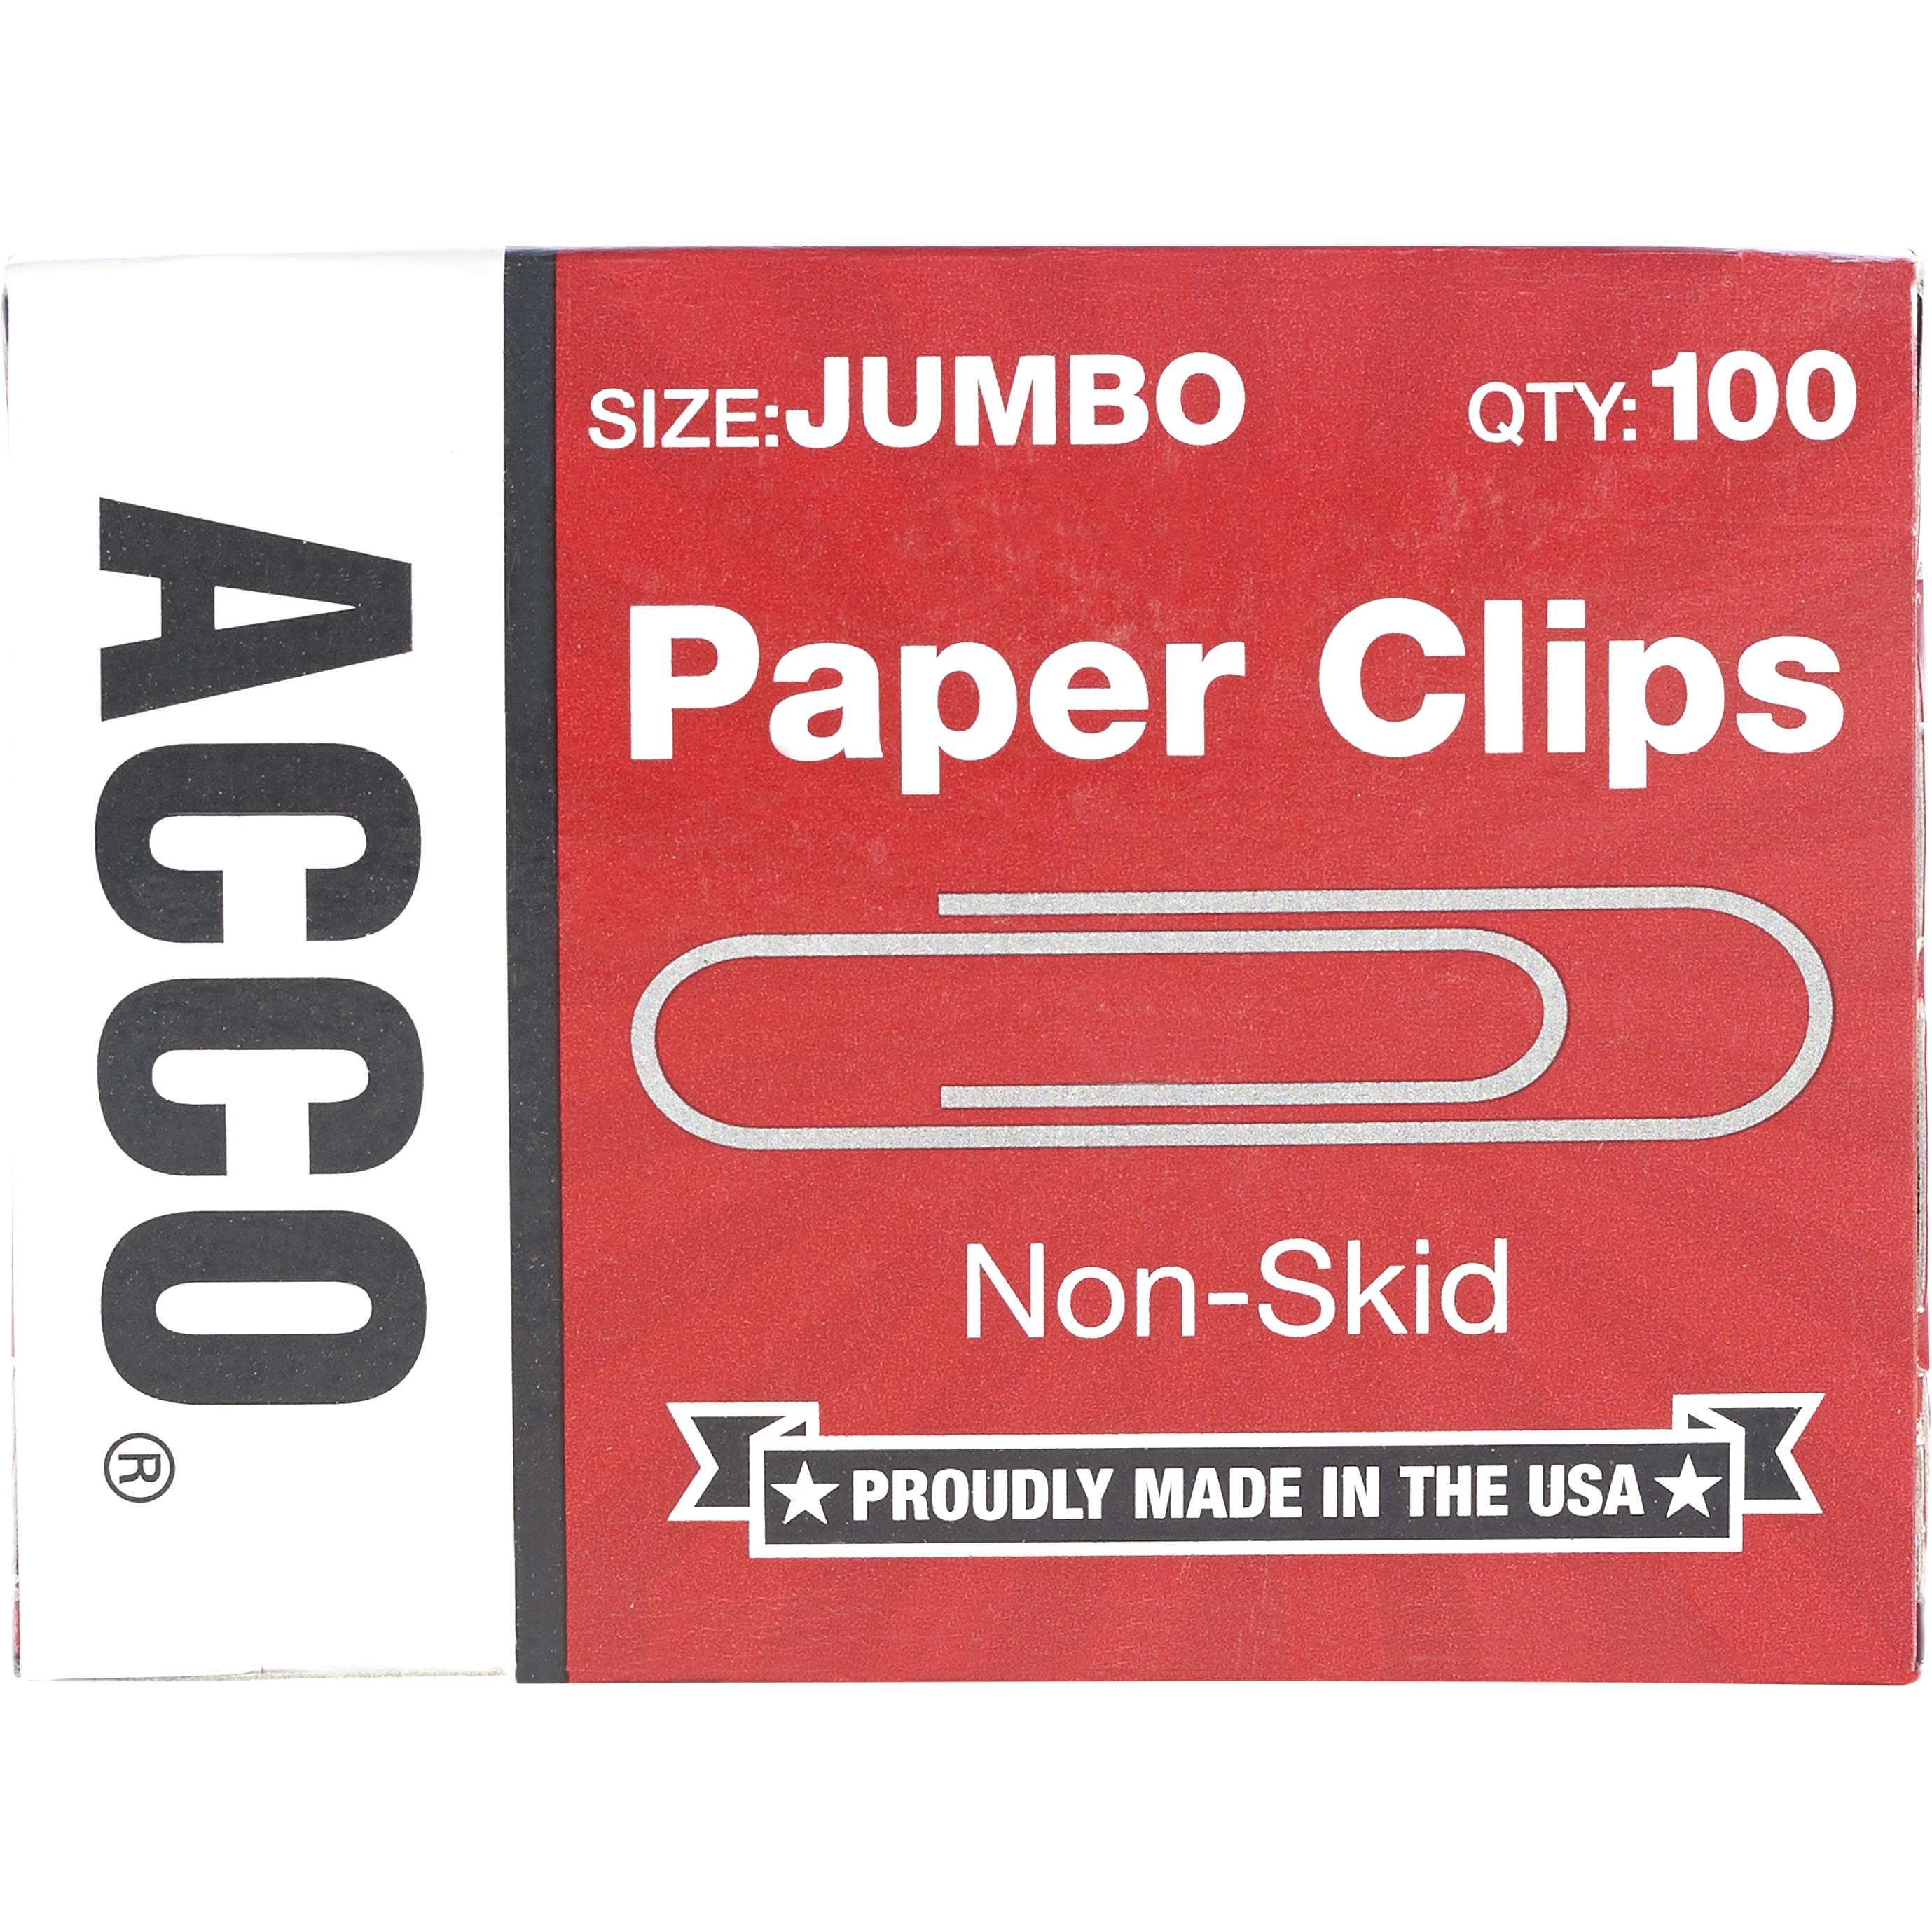 ACCO Nonskid Standard Paper Clips, Jumbo, Silver, 100/Box, 10 Boxes/Pack - image 3 of 3